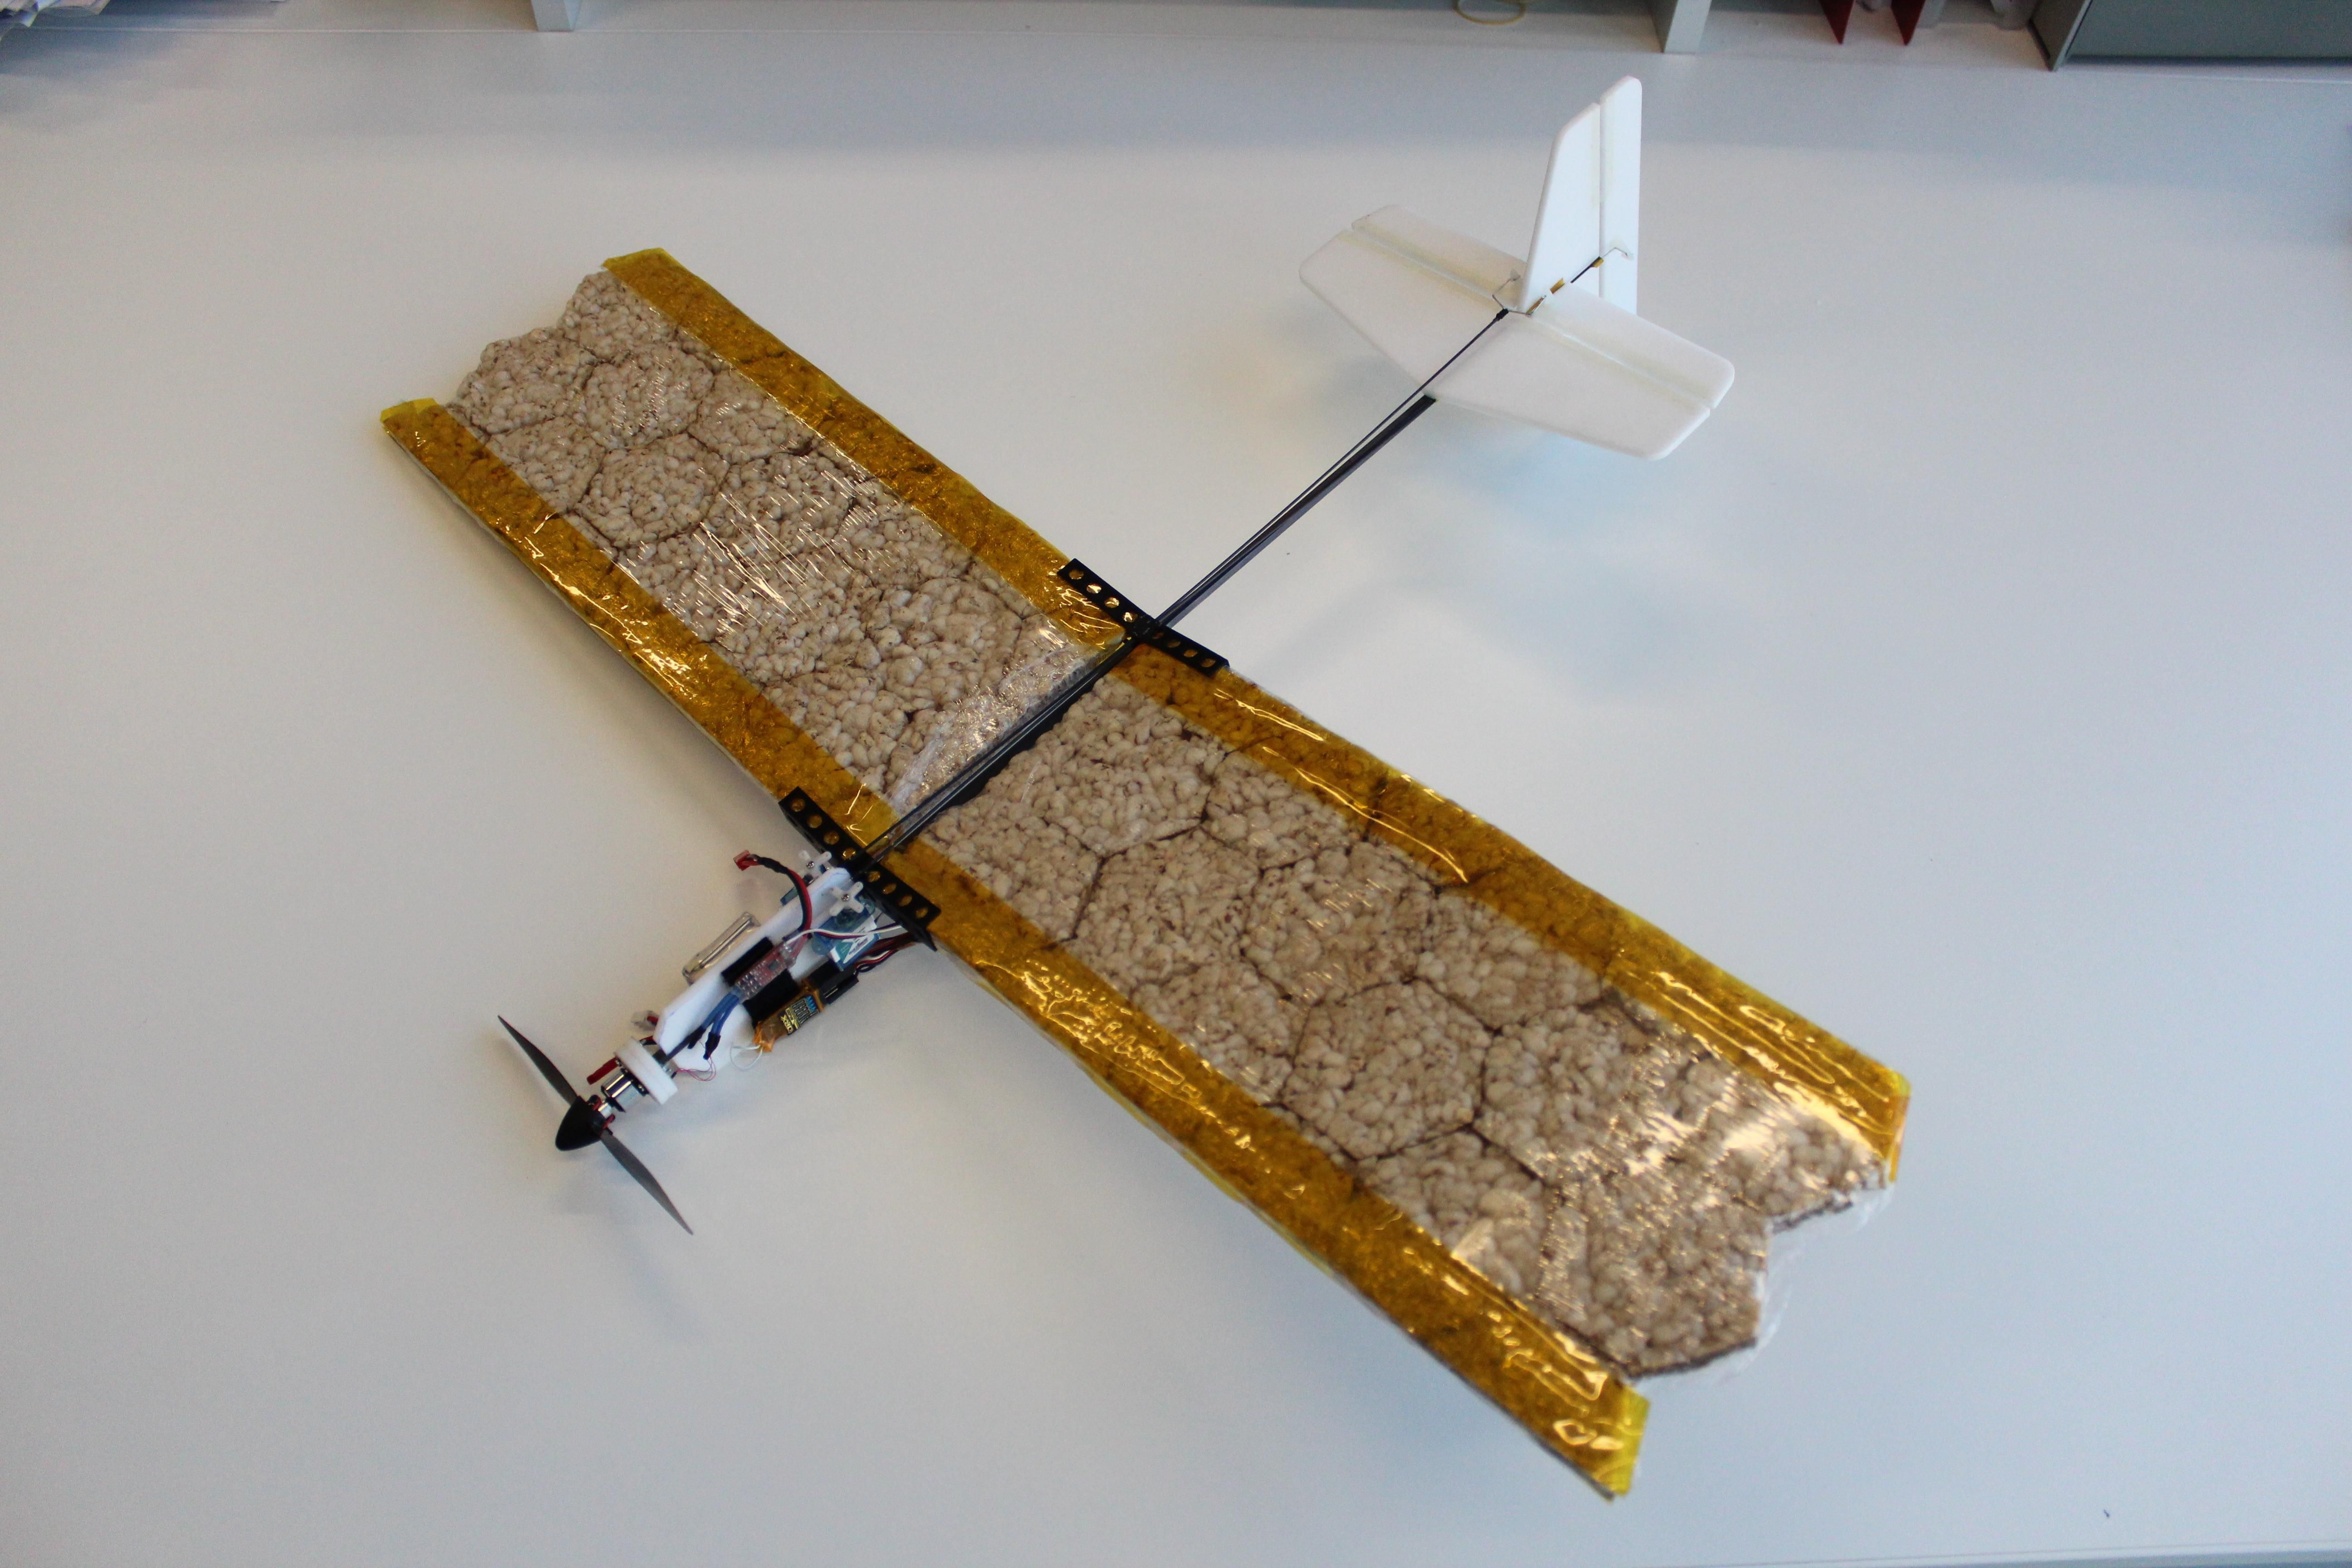 A drone airplane sits on a lab bench, it has a normal propeller and motor and tail but its wings are made of rice crackers covered in clear plastic